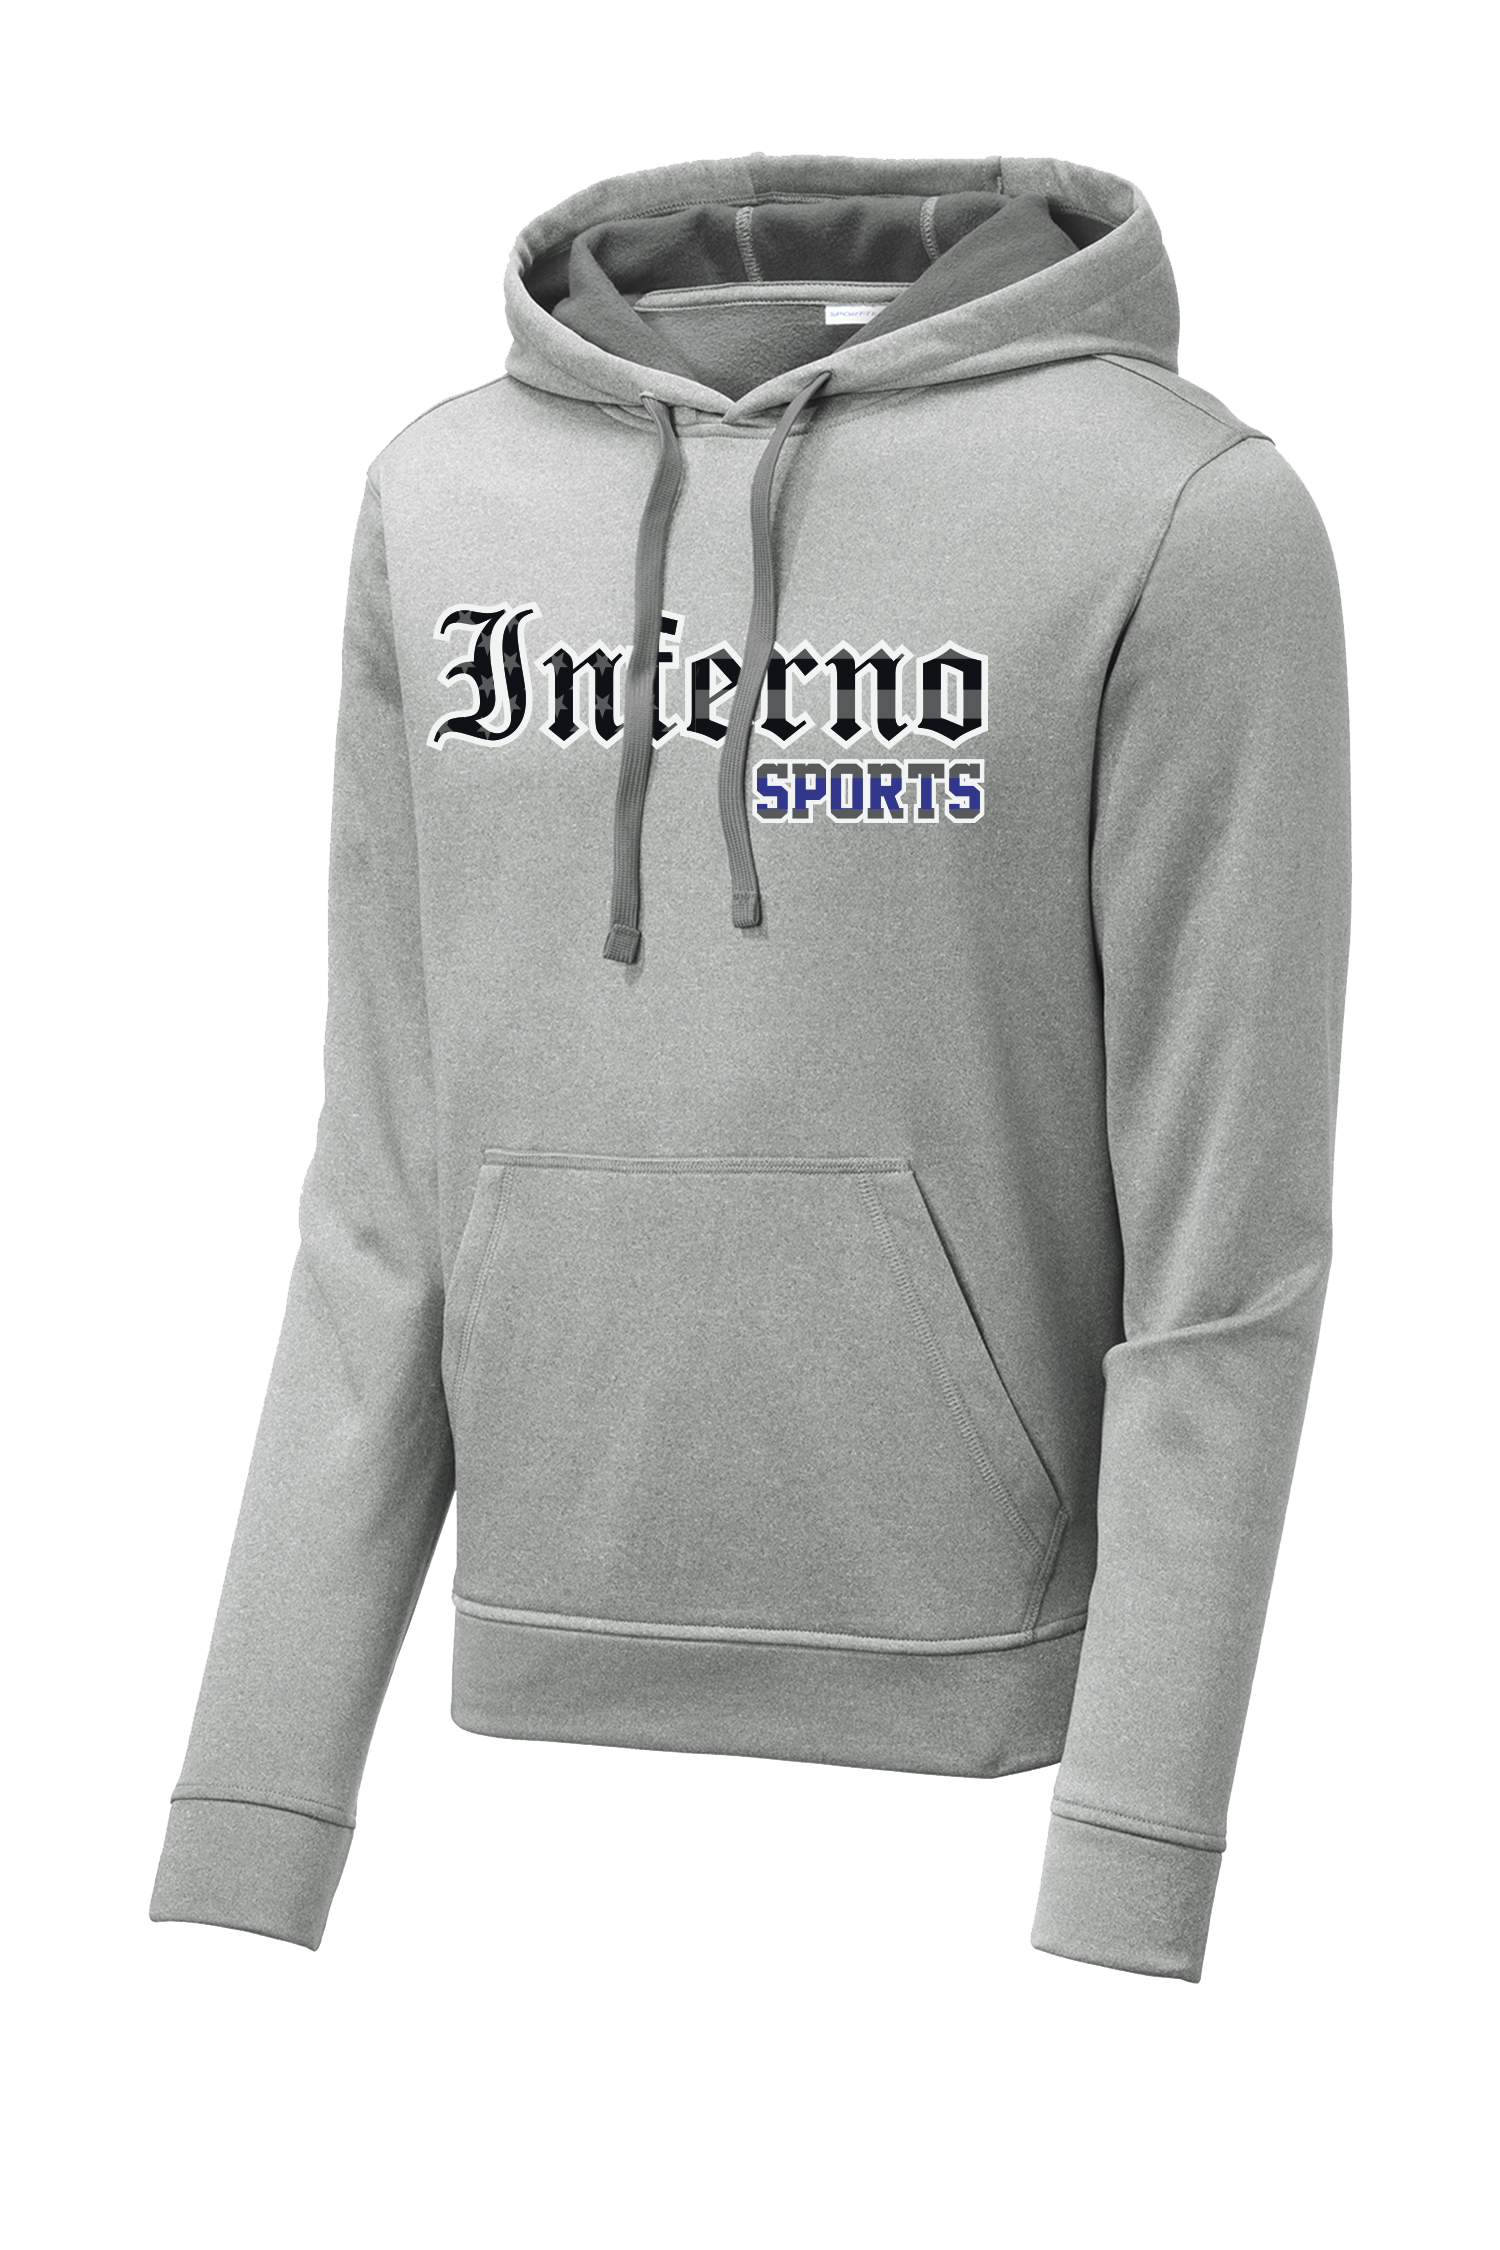 Inferno Heather Fleece Hooded Pullover -Blue Line Flag